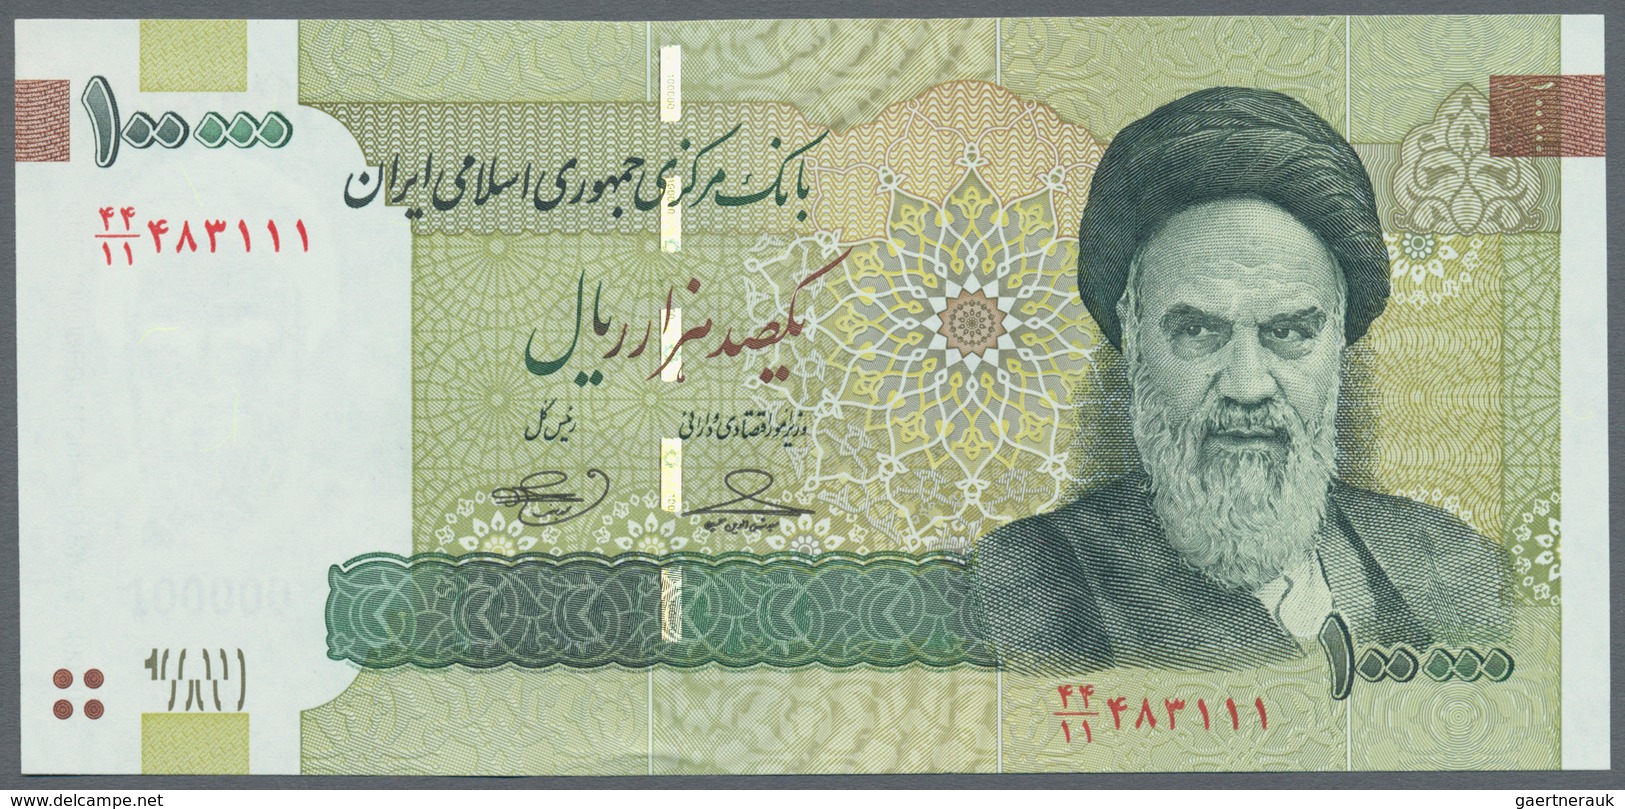 Iran: set of 11 different banknotes mostly modern issues from 20 to 100.000 Rials, mostly UNC, pleas